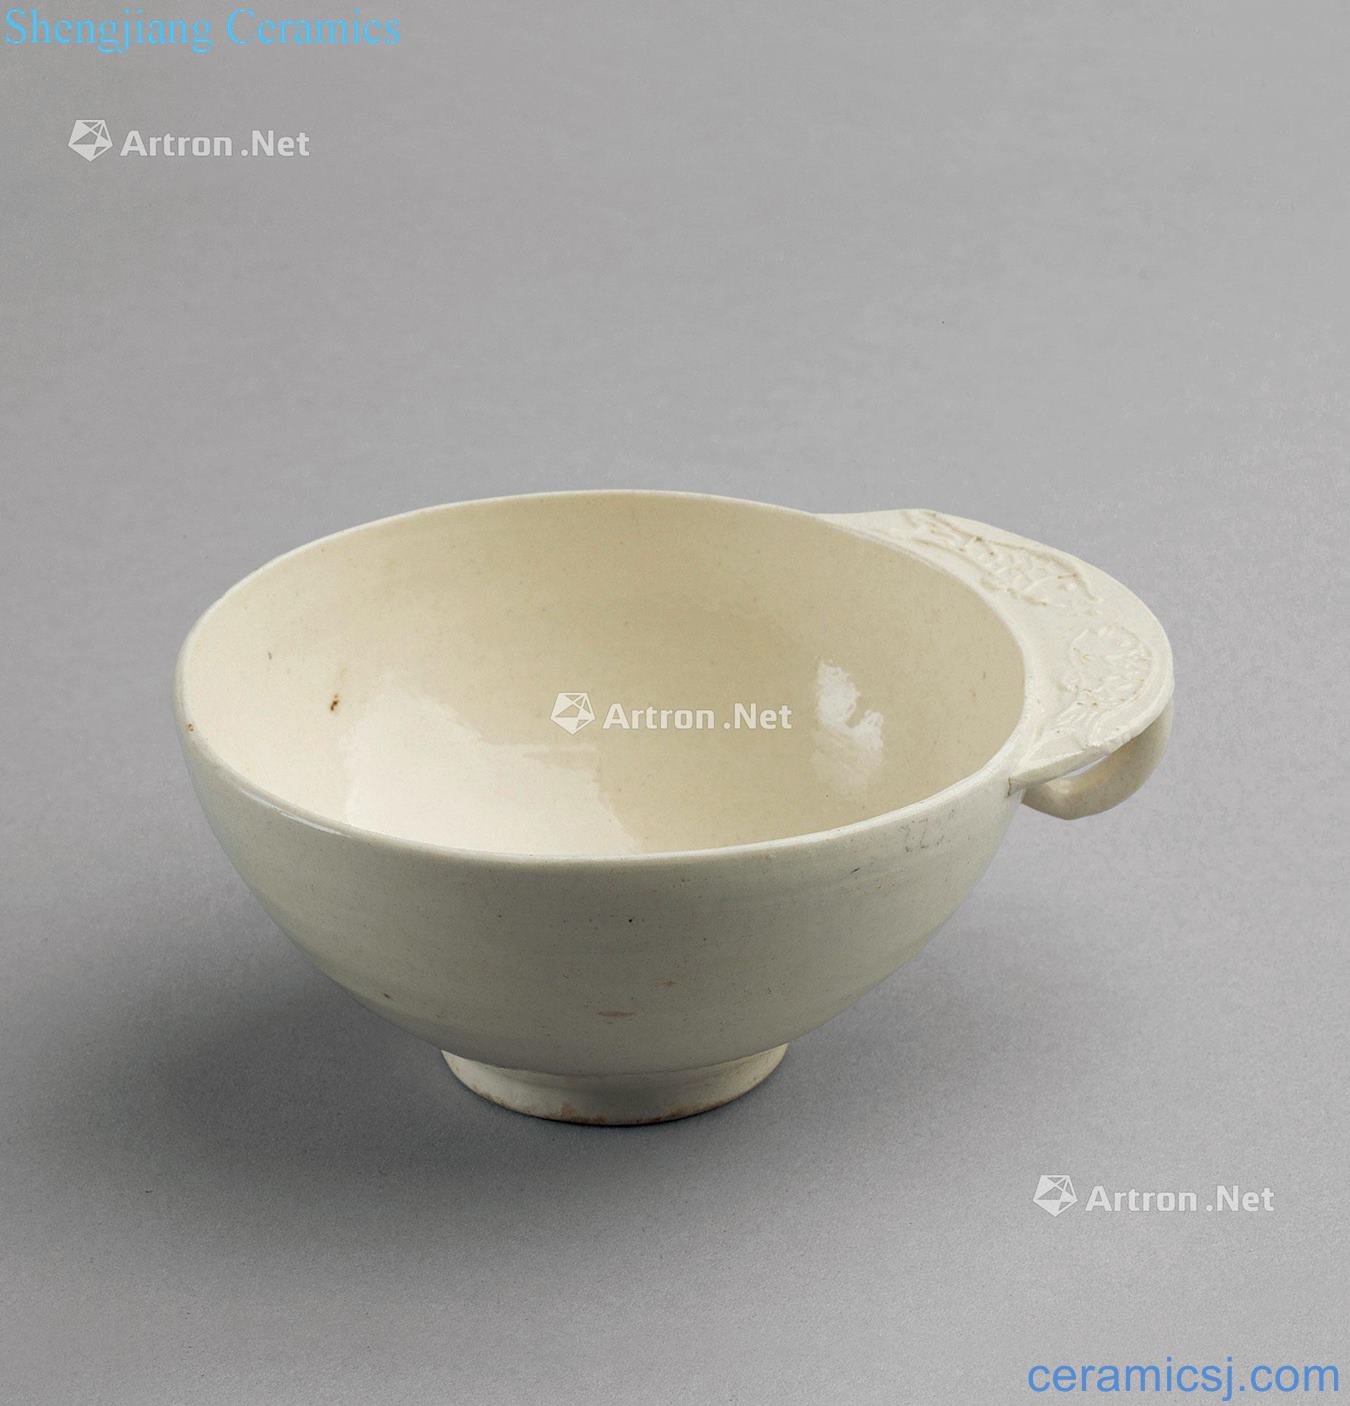 The yuan dynasty Mr Kiln Pisces the cup